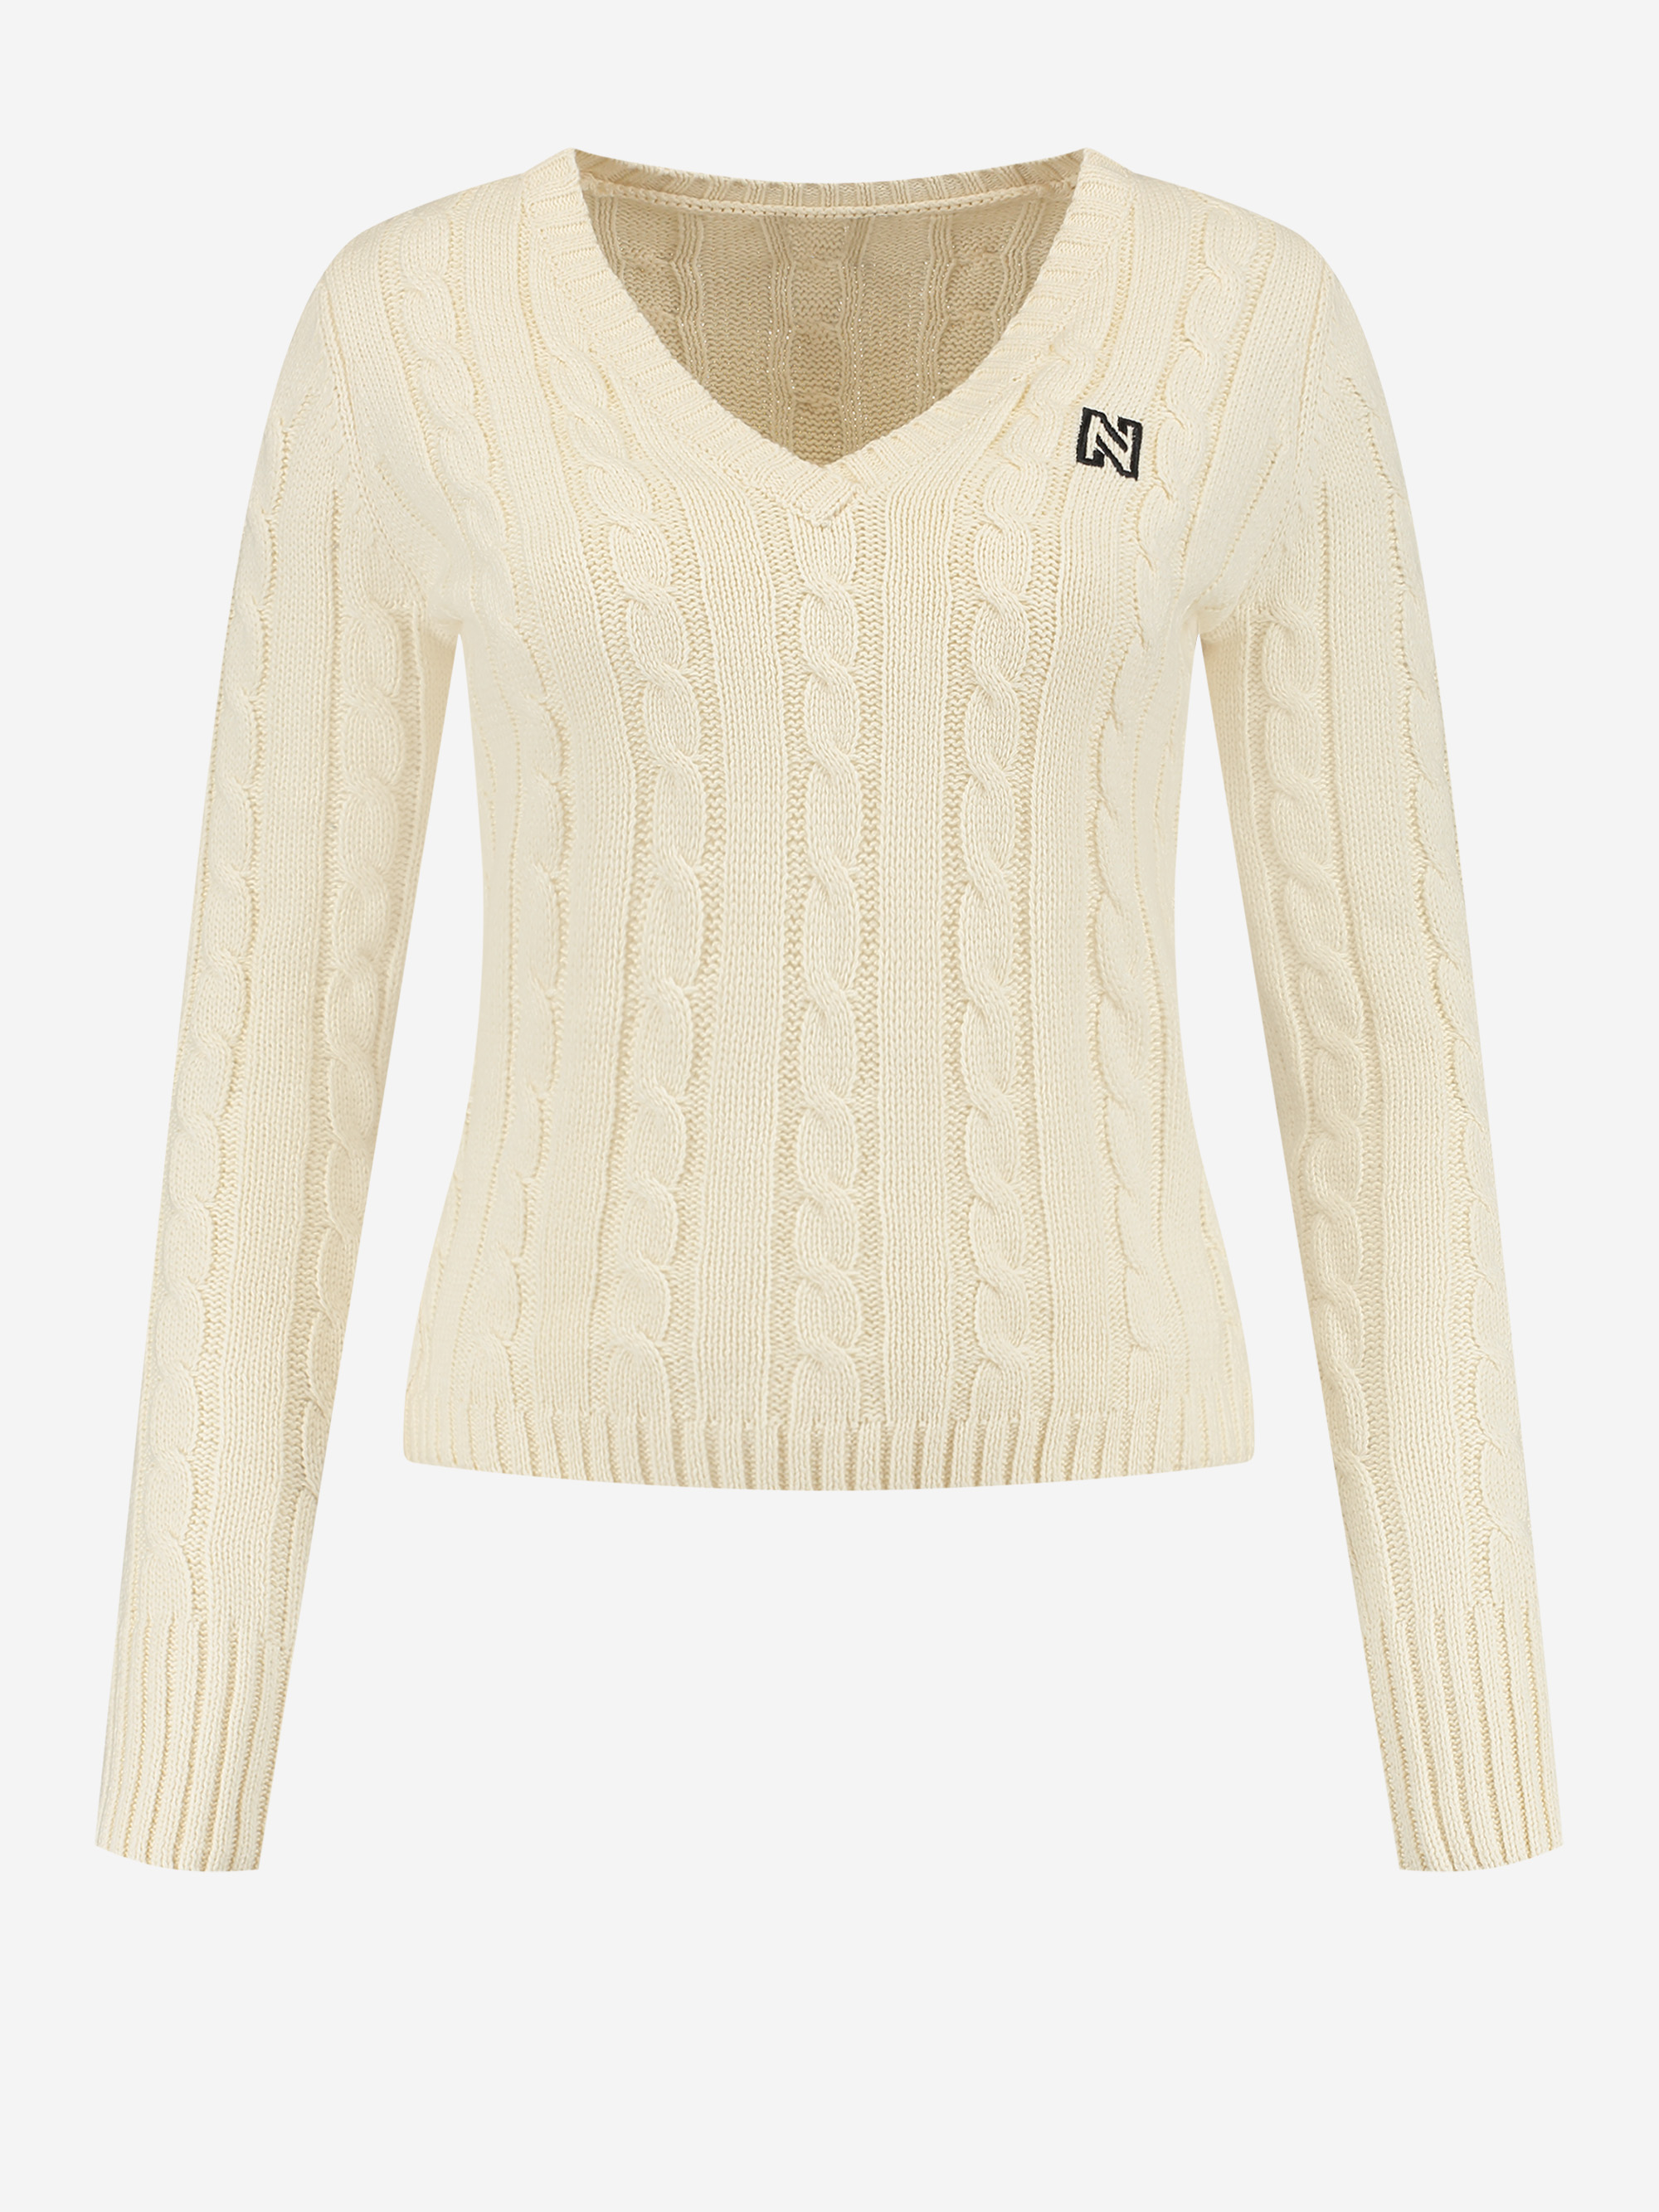 Cable knitted sweater with N-logo